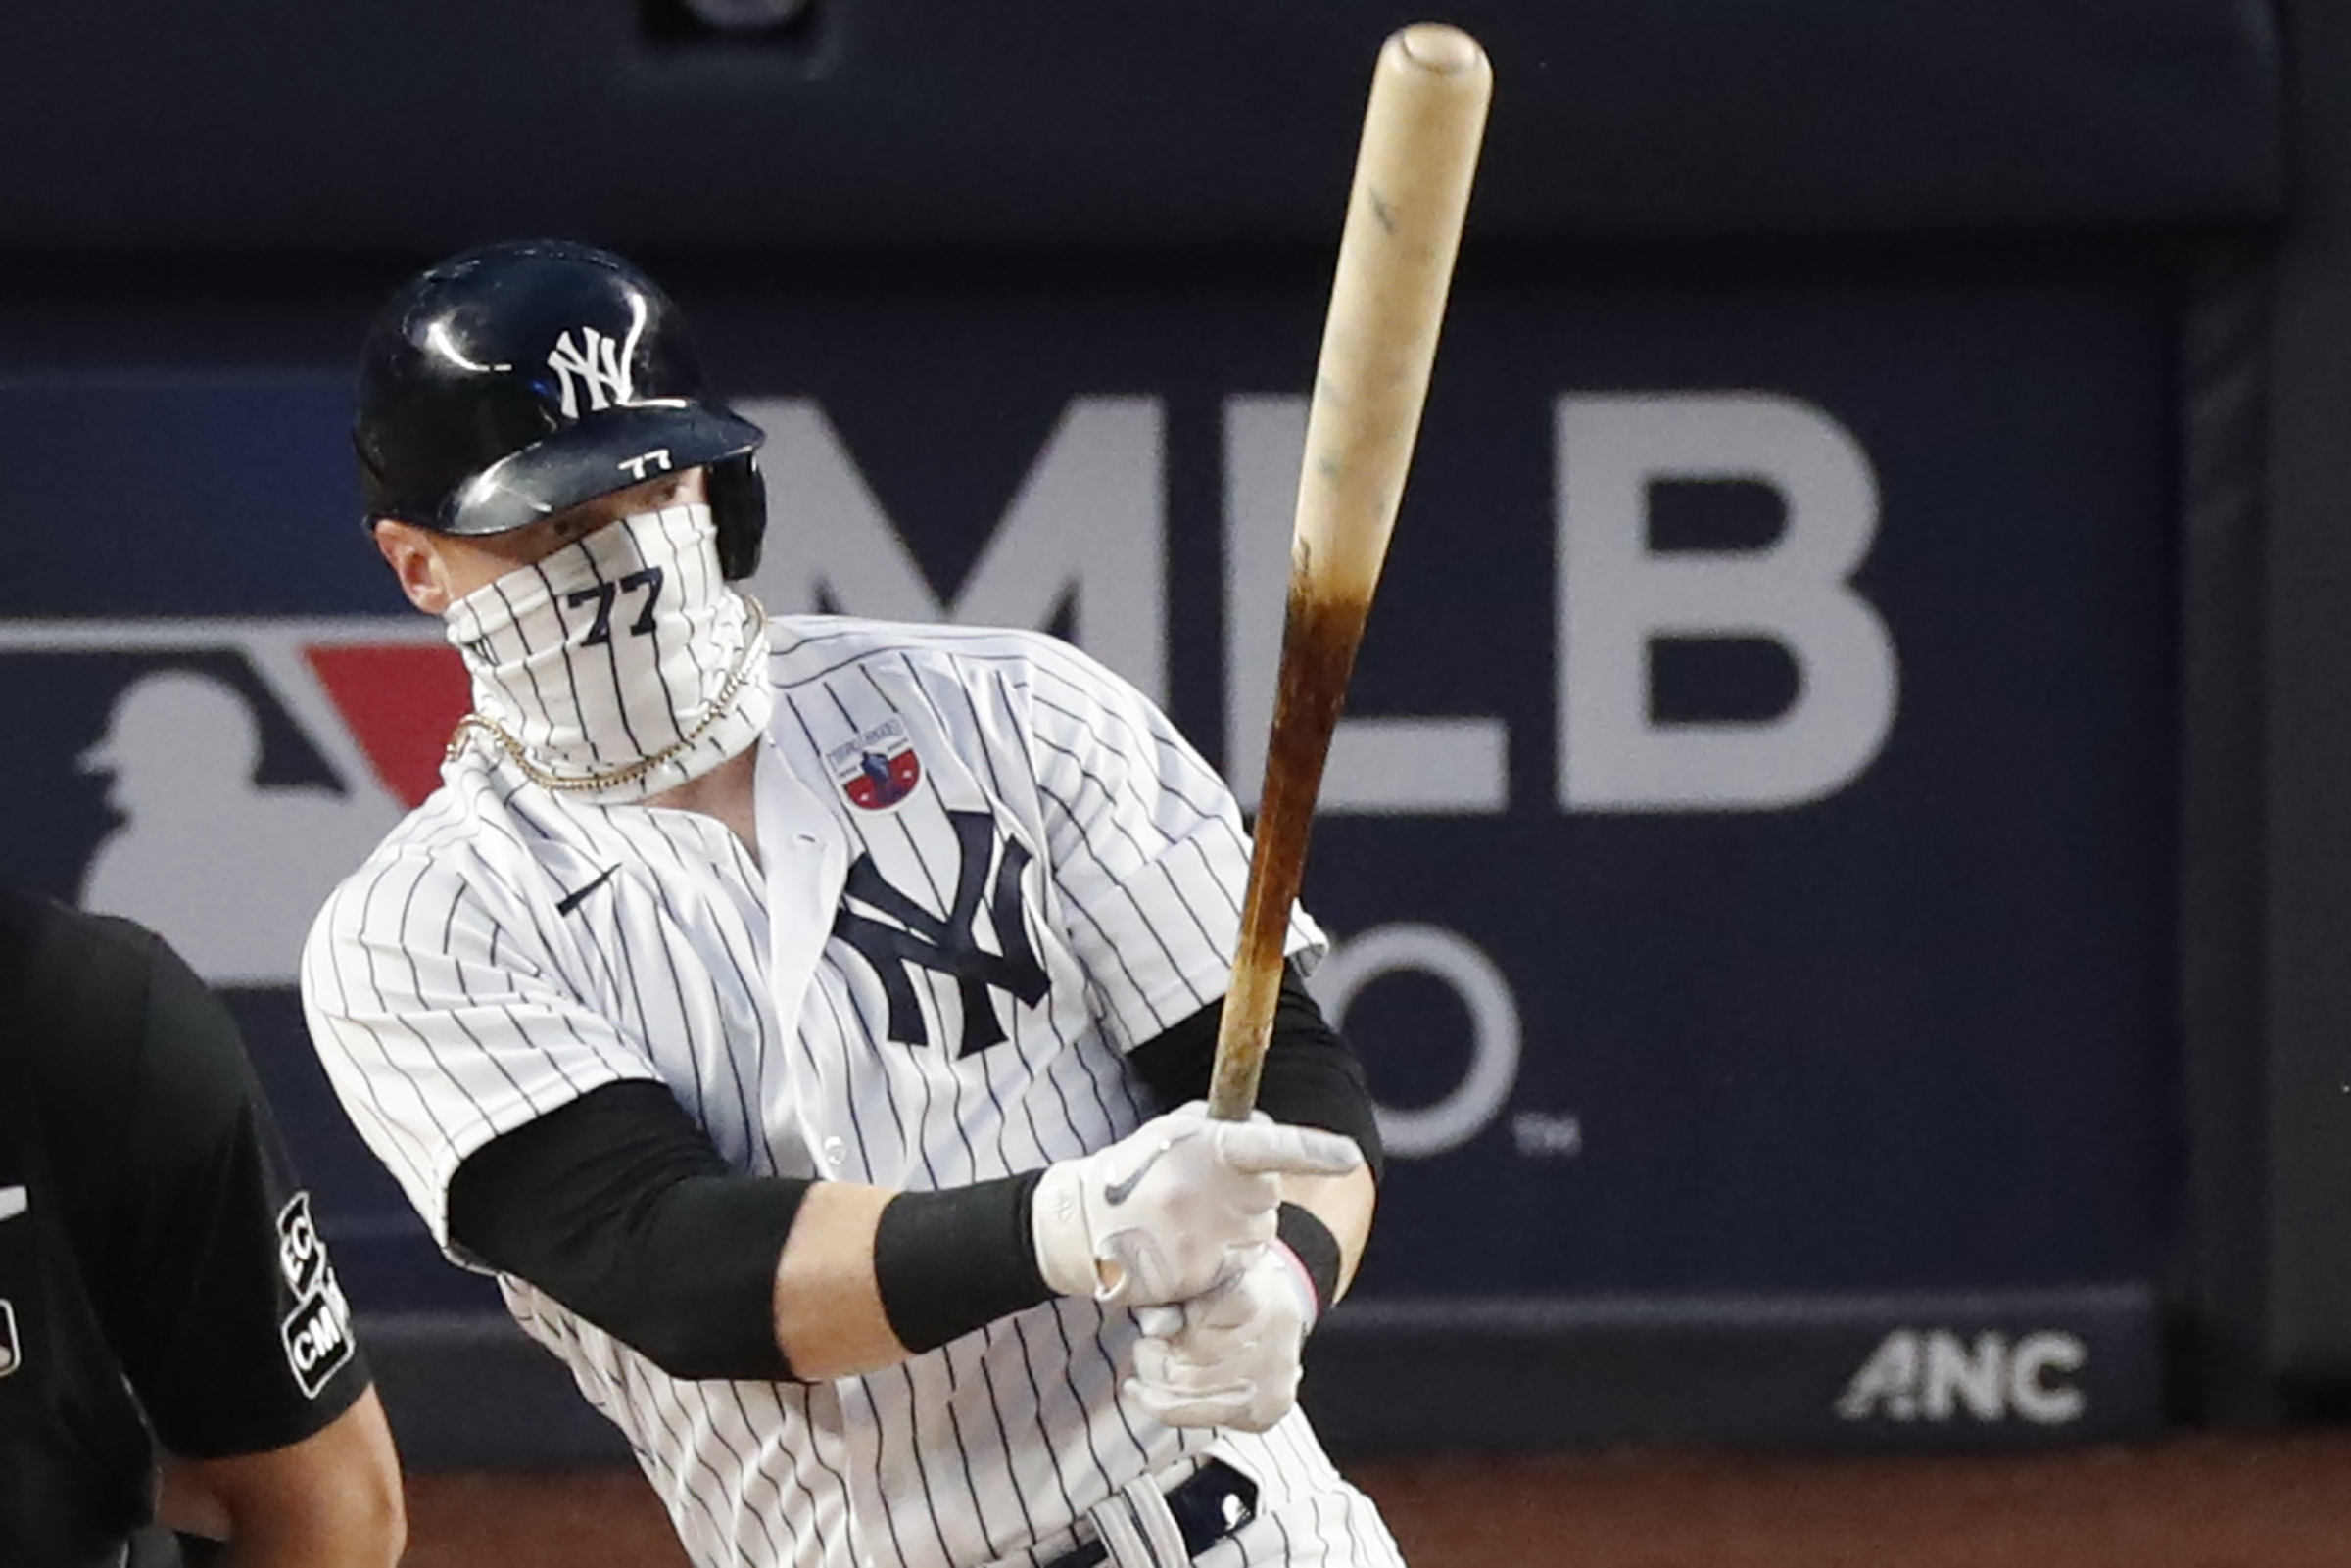 Yankees To Promote Clint Frazier - MLB Trade Rumors